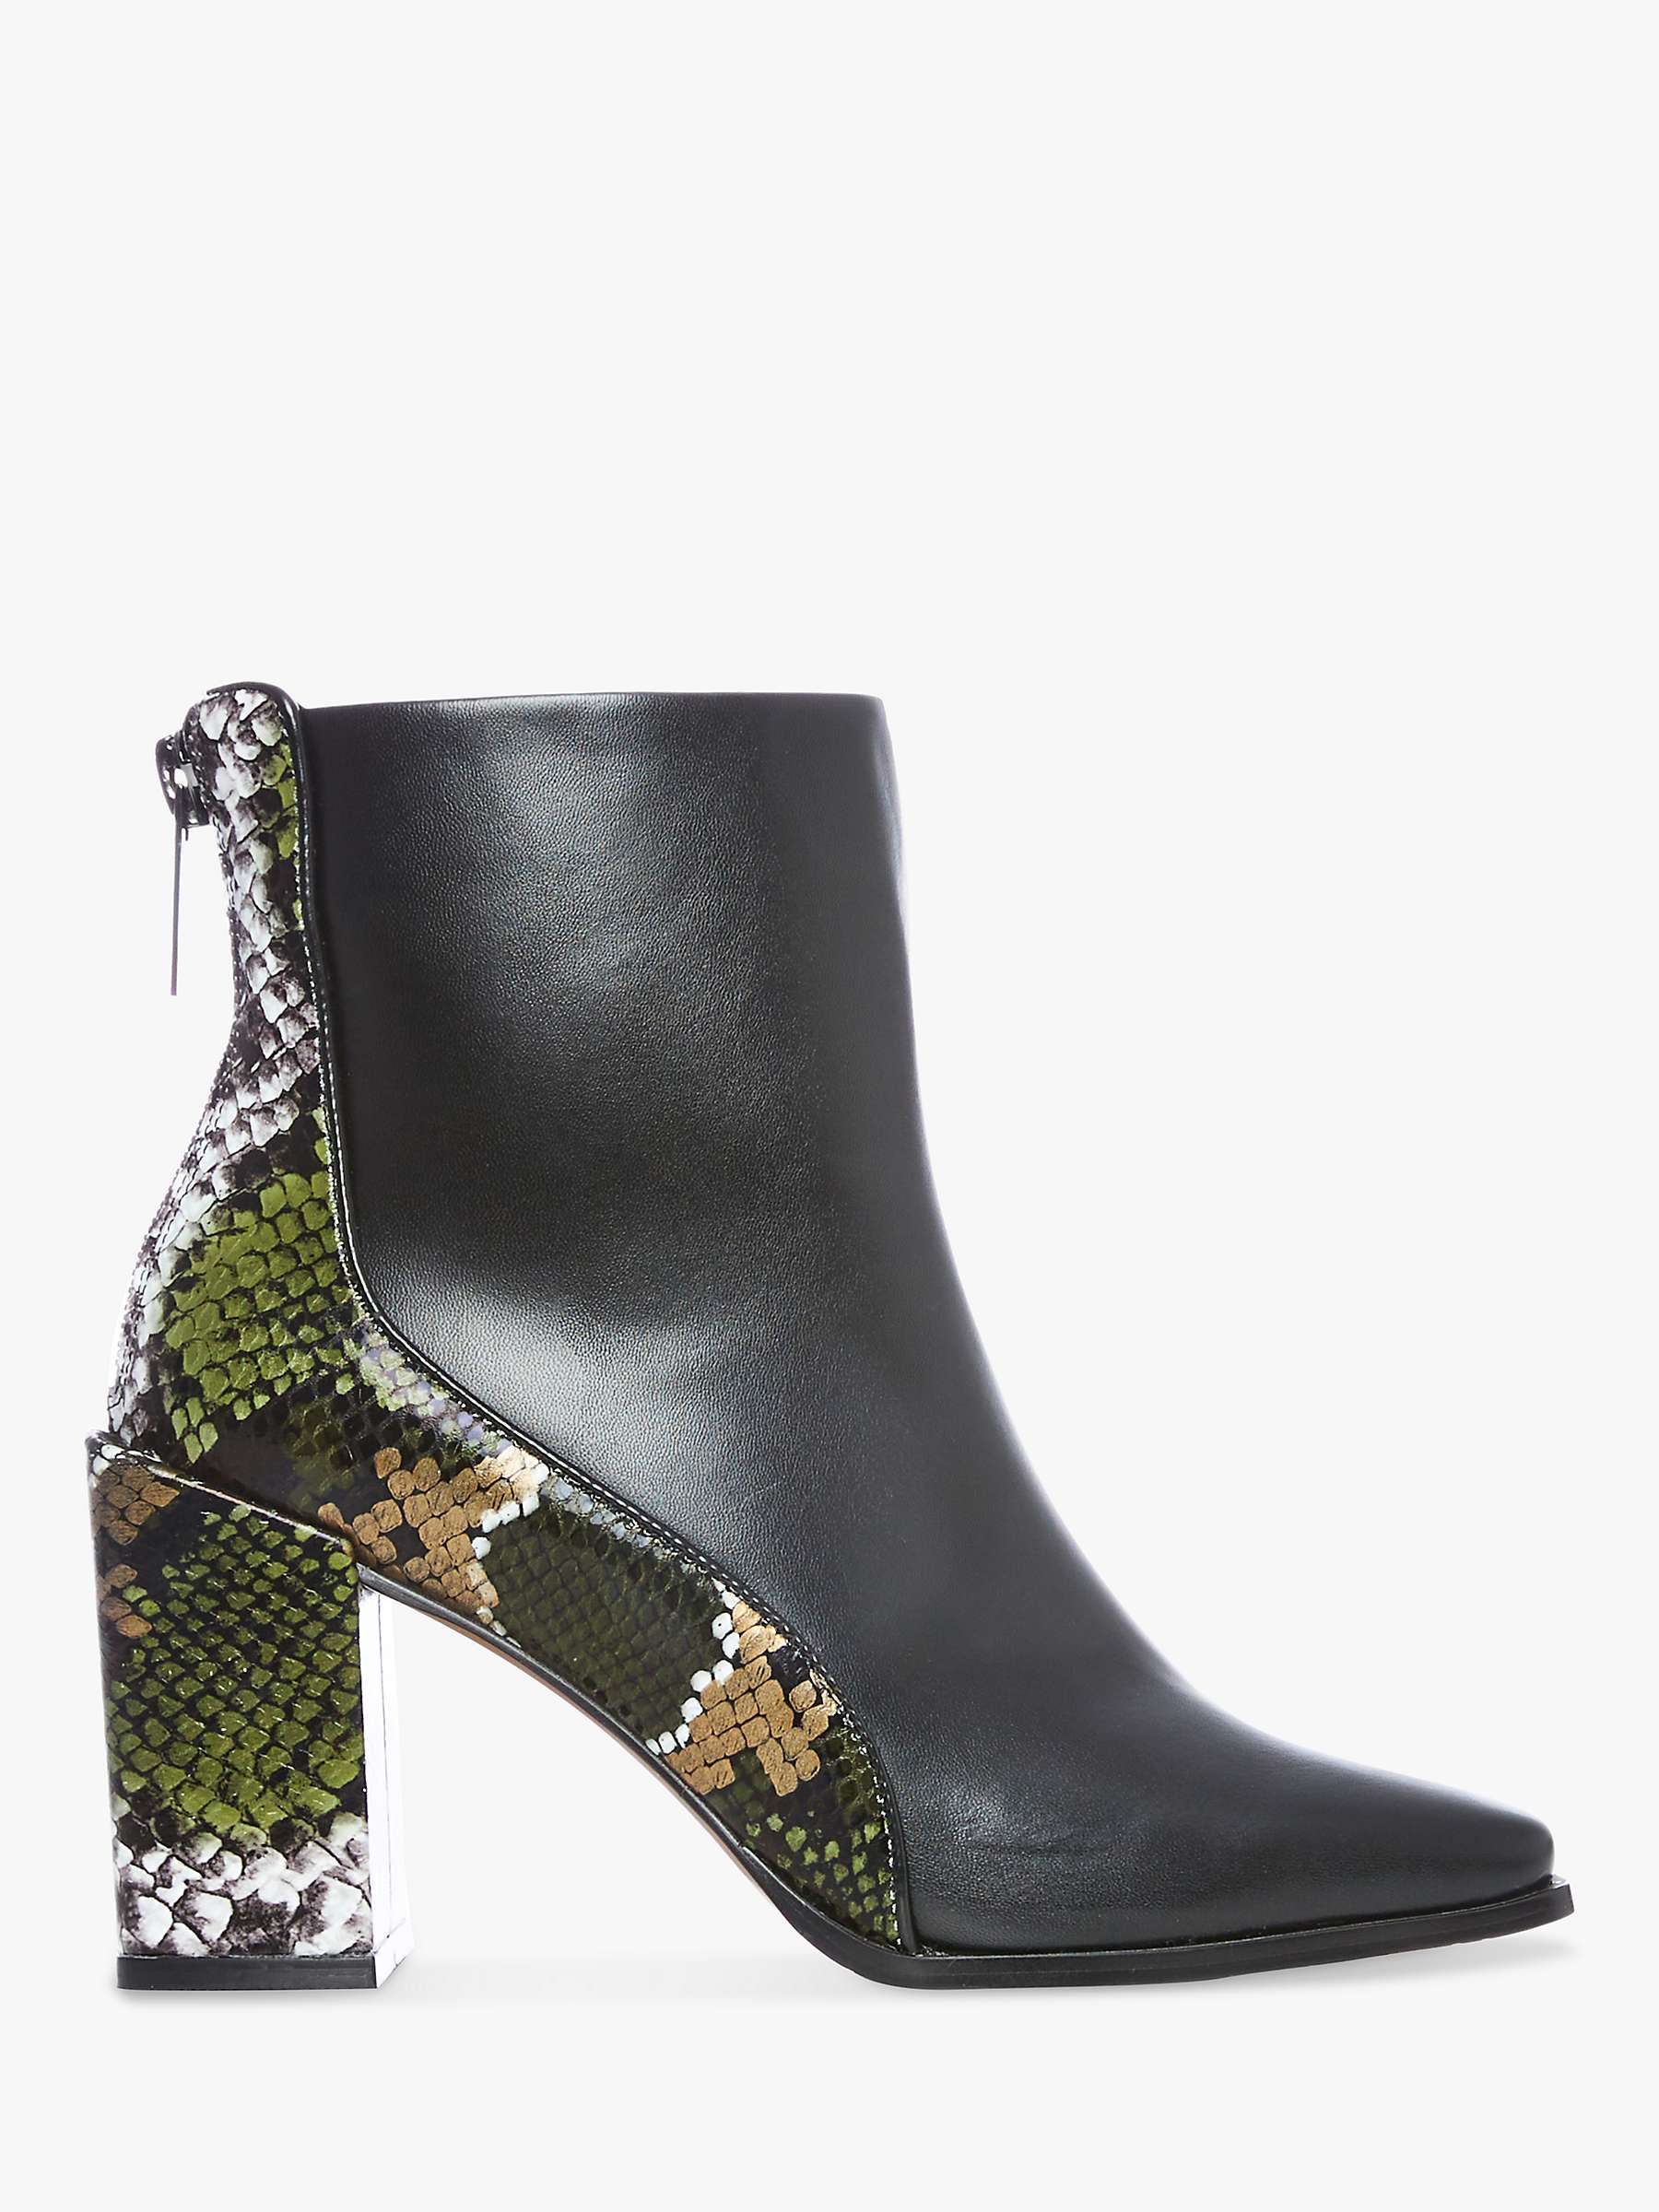 Buy Moda in Pelle Taysha Leather Point Toe Ankle Boots, Black Online at johnlewis.com